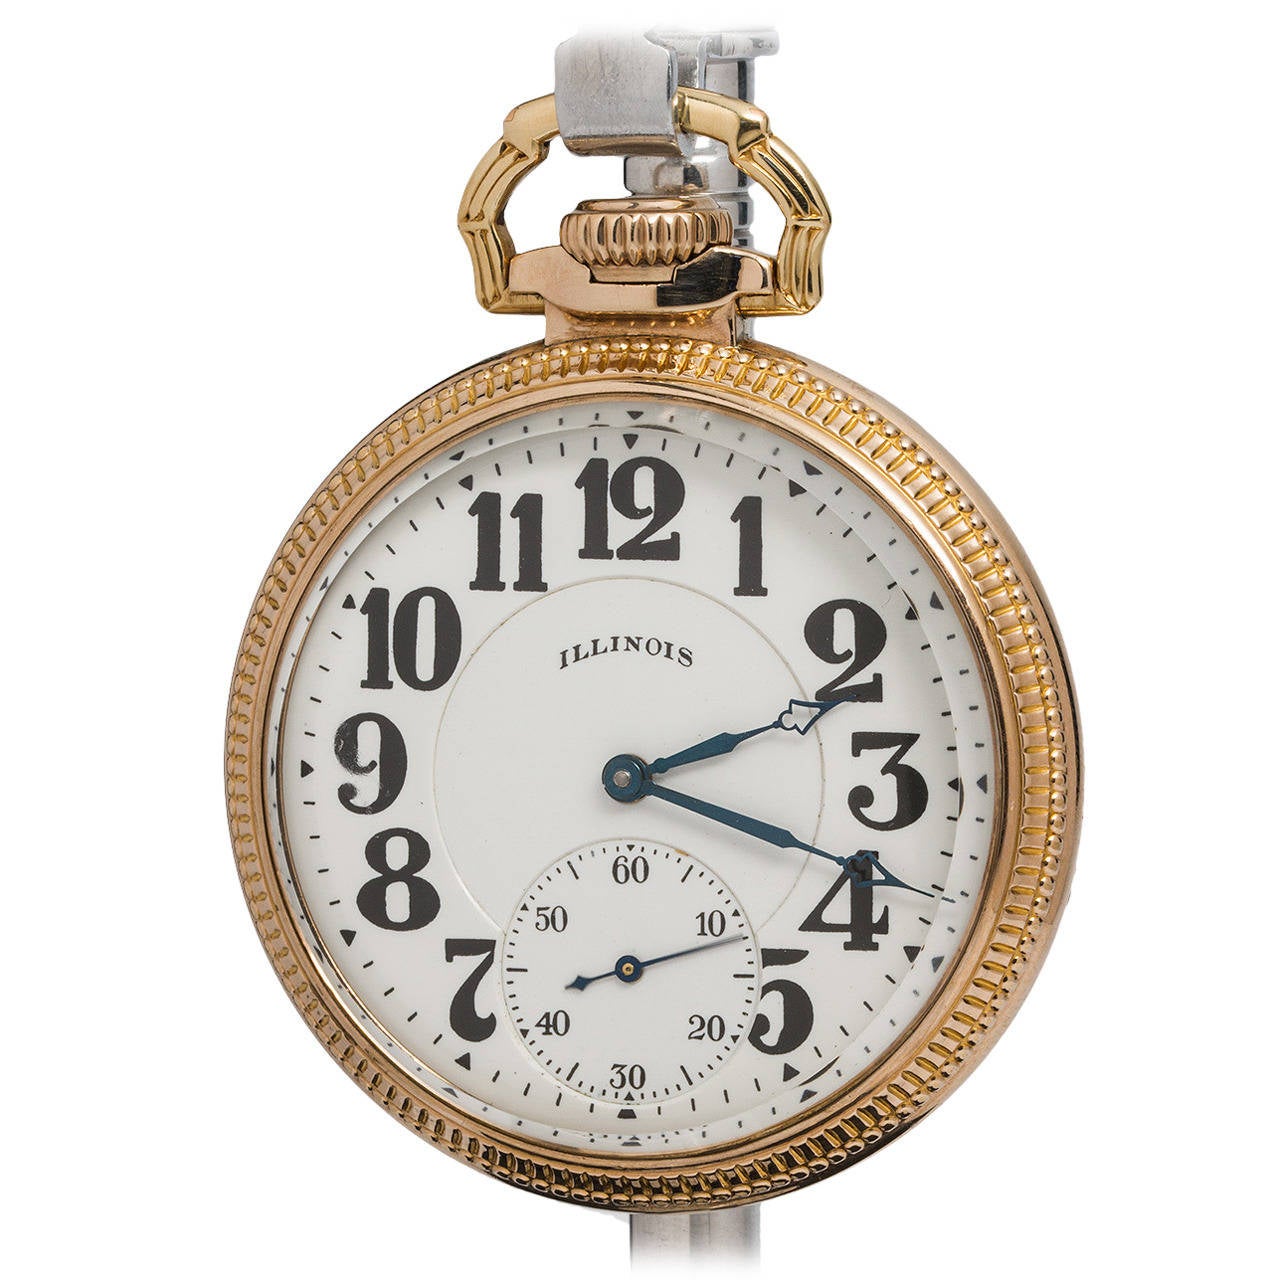 Illinois Yellow Gold-Filled Railroad-Grade Bunn Special Pocket Watch